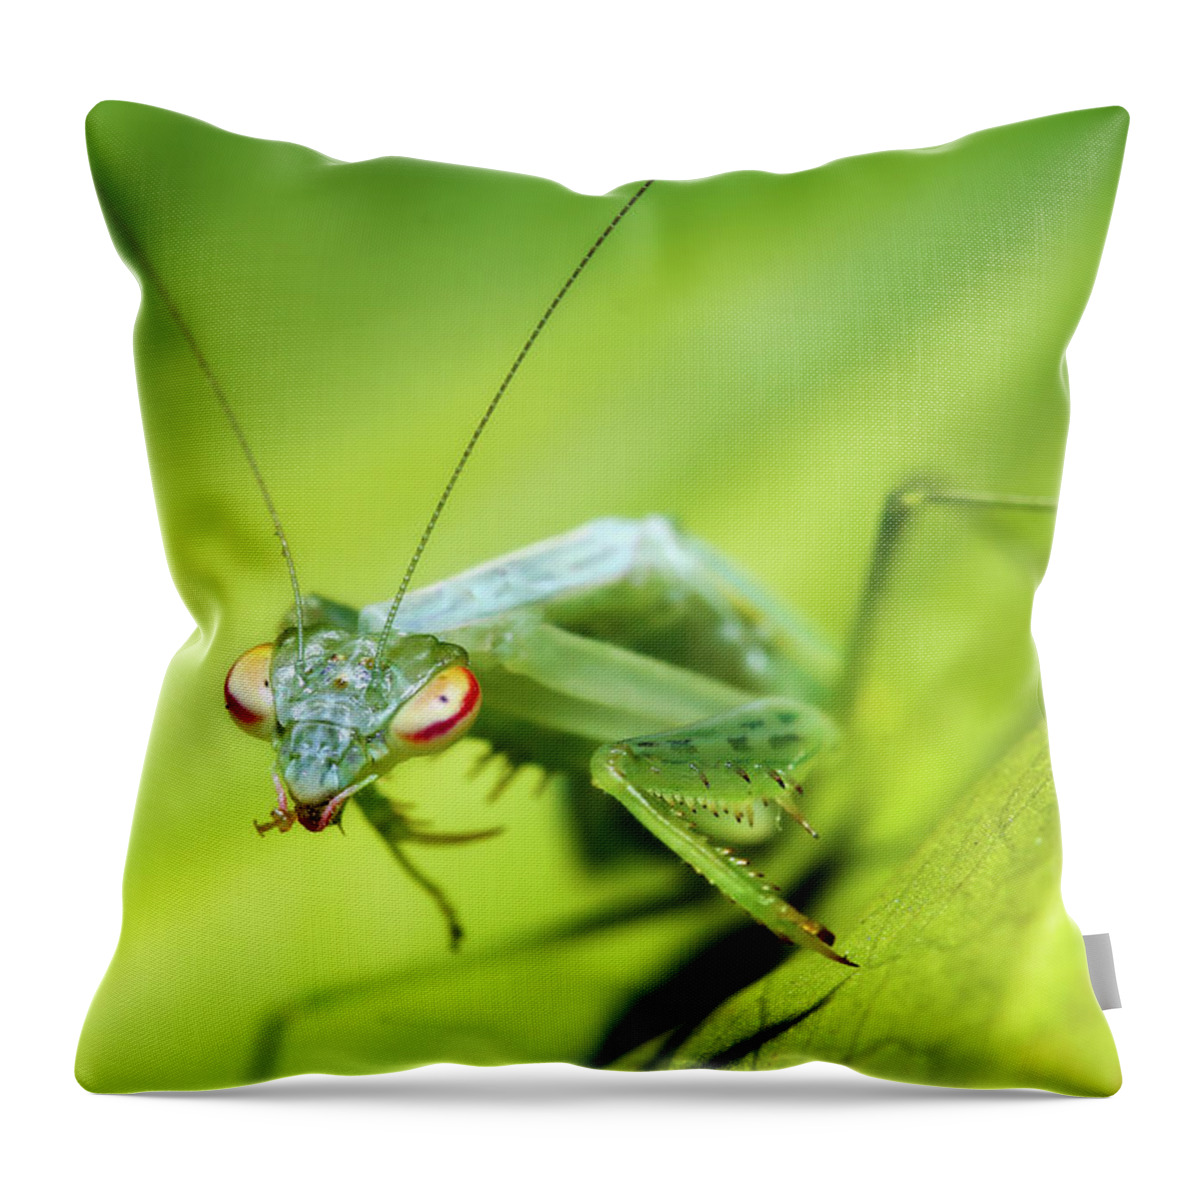 Praymantes Photography Throw Pillow featuring the photograph Baby Praymantes 6677 by Kevin Chippindall